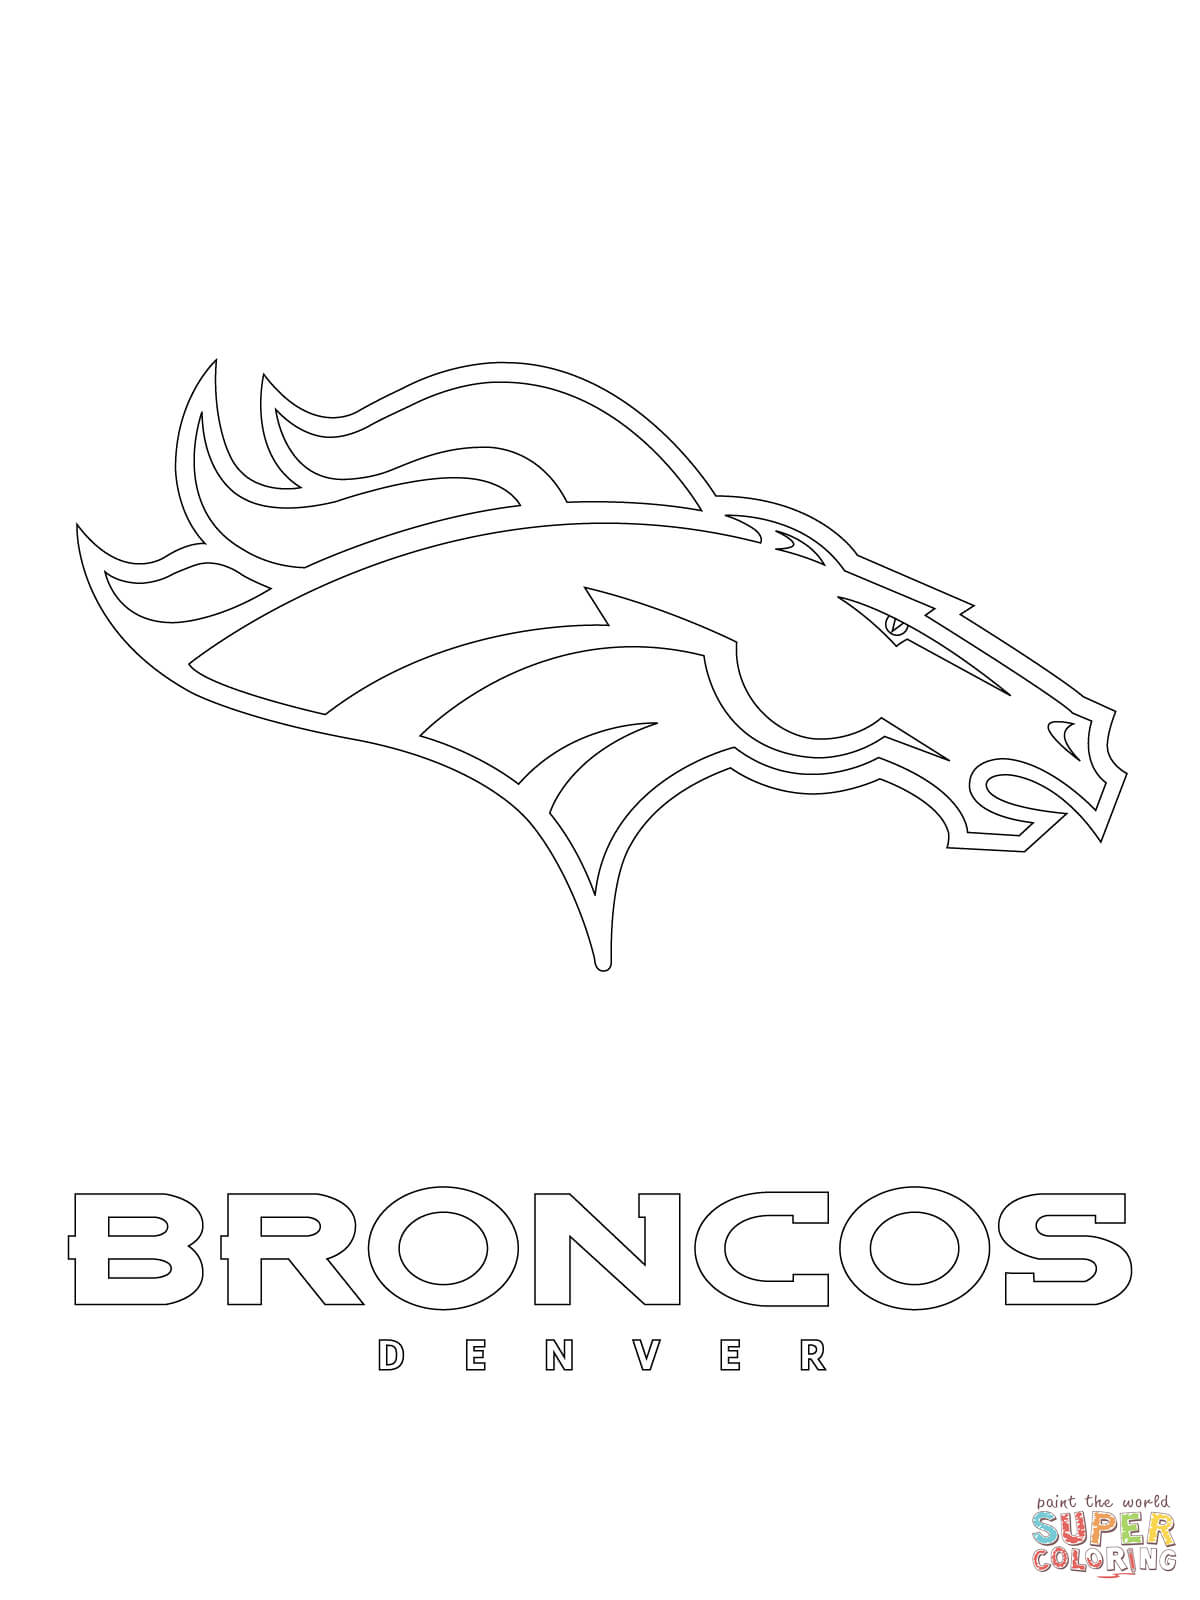 Denver broncos logo coloring page free printable coloring pages